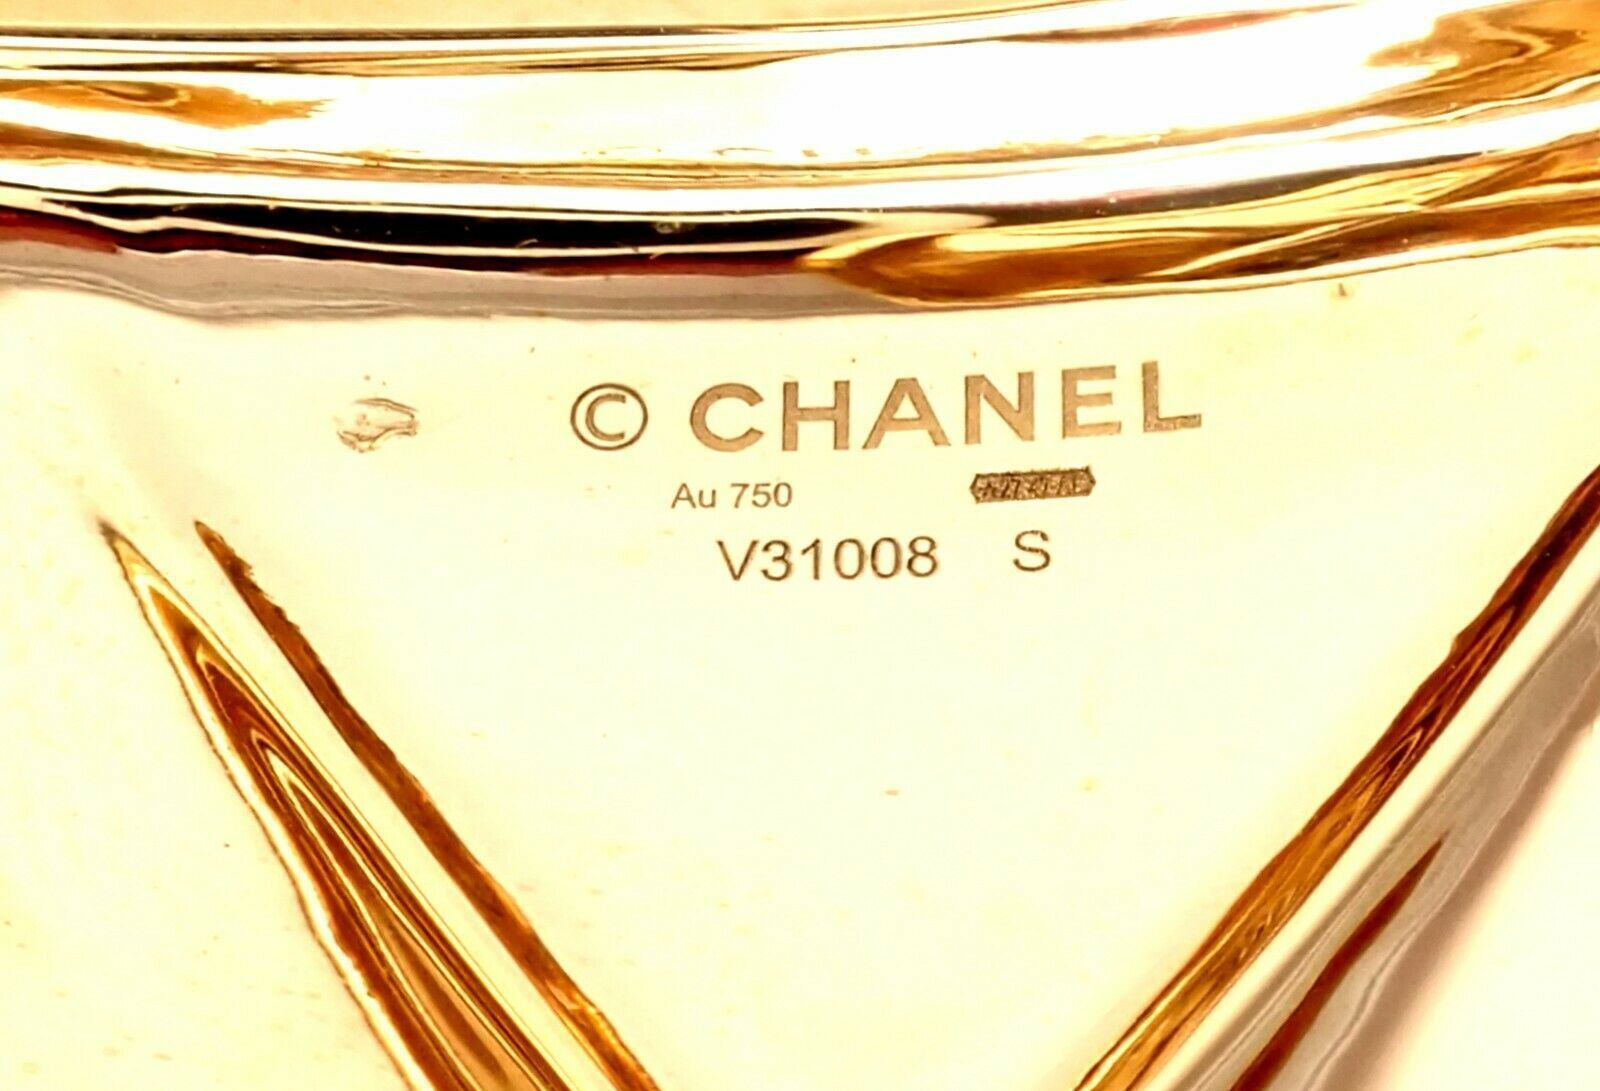 CHANEL Jewelry & Watches:Fine Jewelry:Bracelets & Charms Authentic! Chanel Coco Crush 18k Yellow Gold 2" Wide Cuff Bangle Bracelet Size S